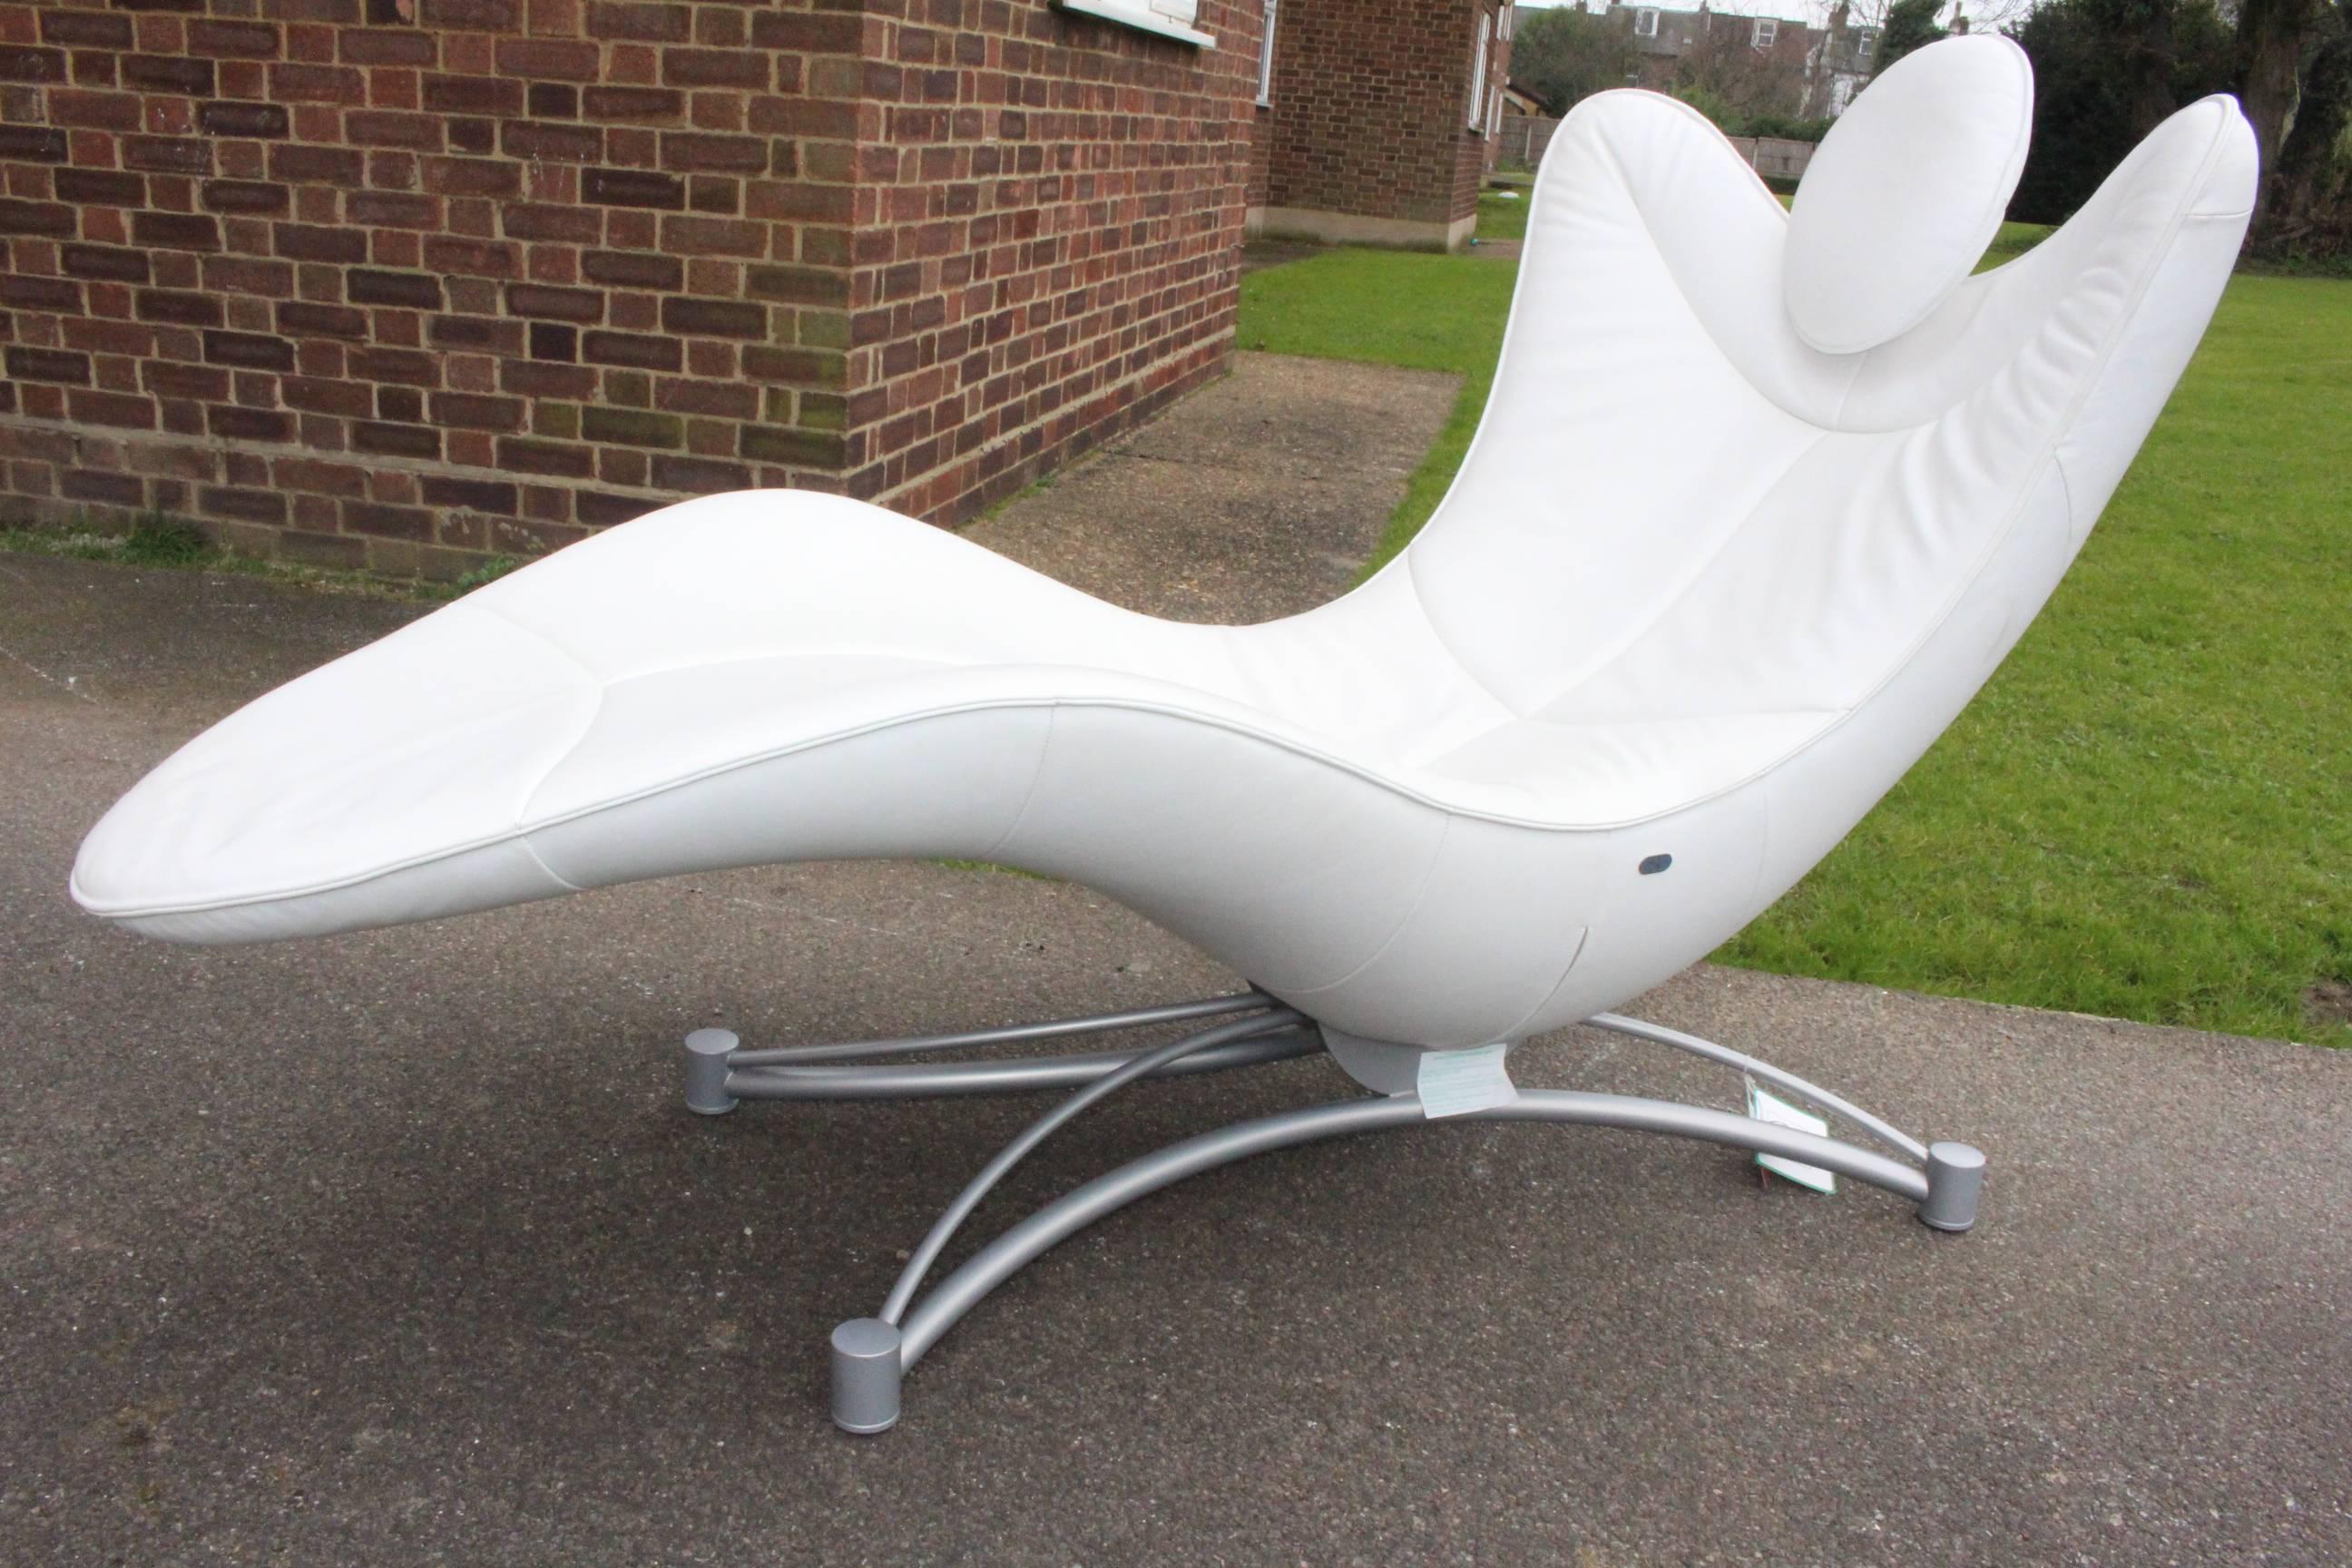 Designer De Sede 151 chaise white leather armchair costs new £6000
well cared for and in very good condition
stylish 

The reclining human silhouette is translated into a form which represents the visual epitome of relaxation. 

As the chair